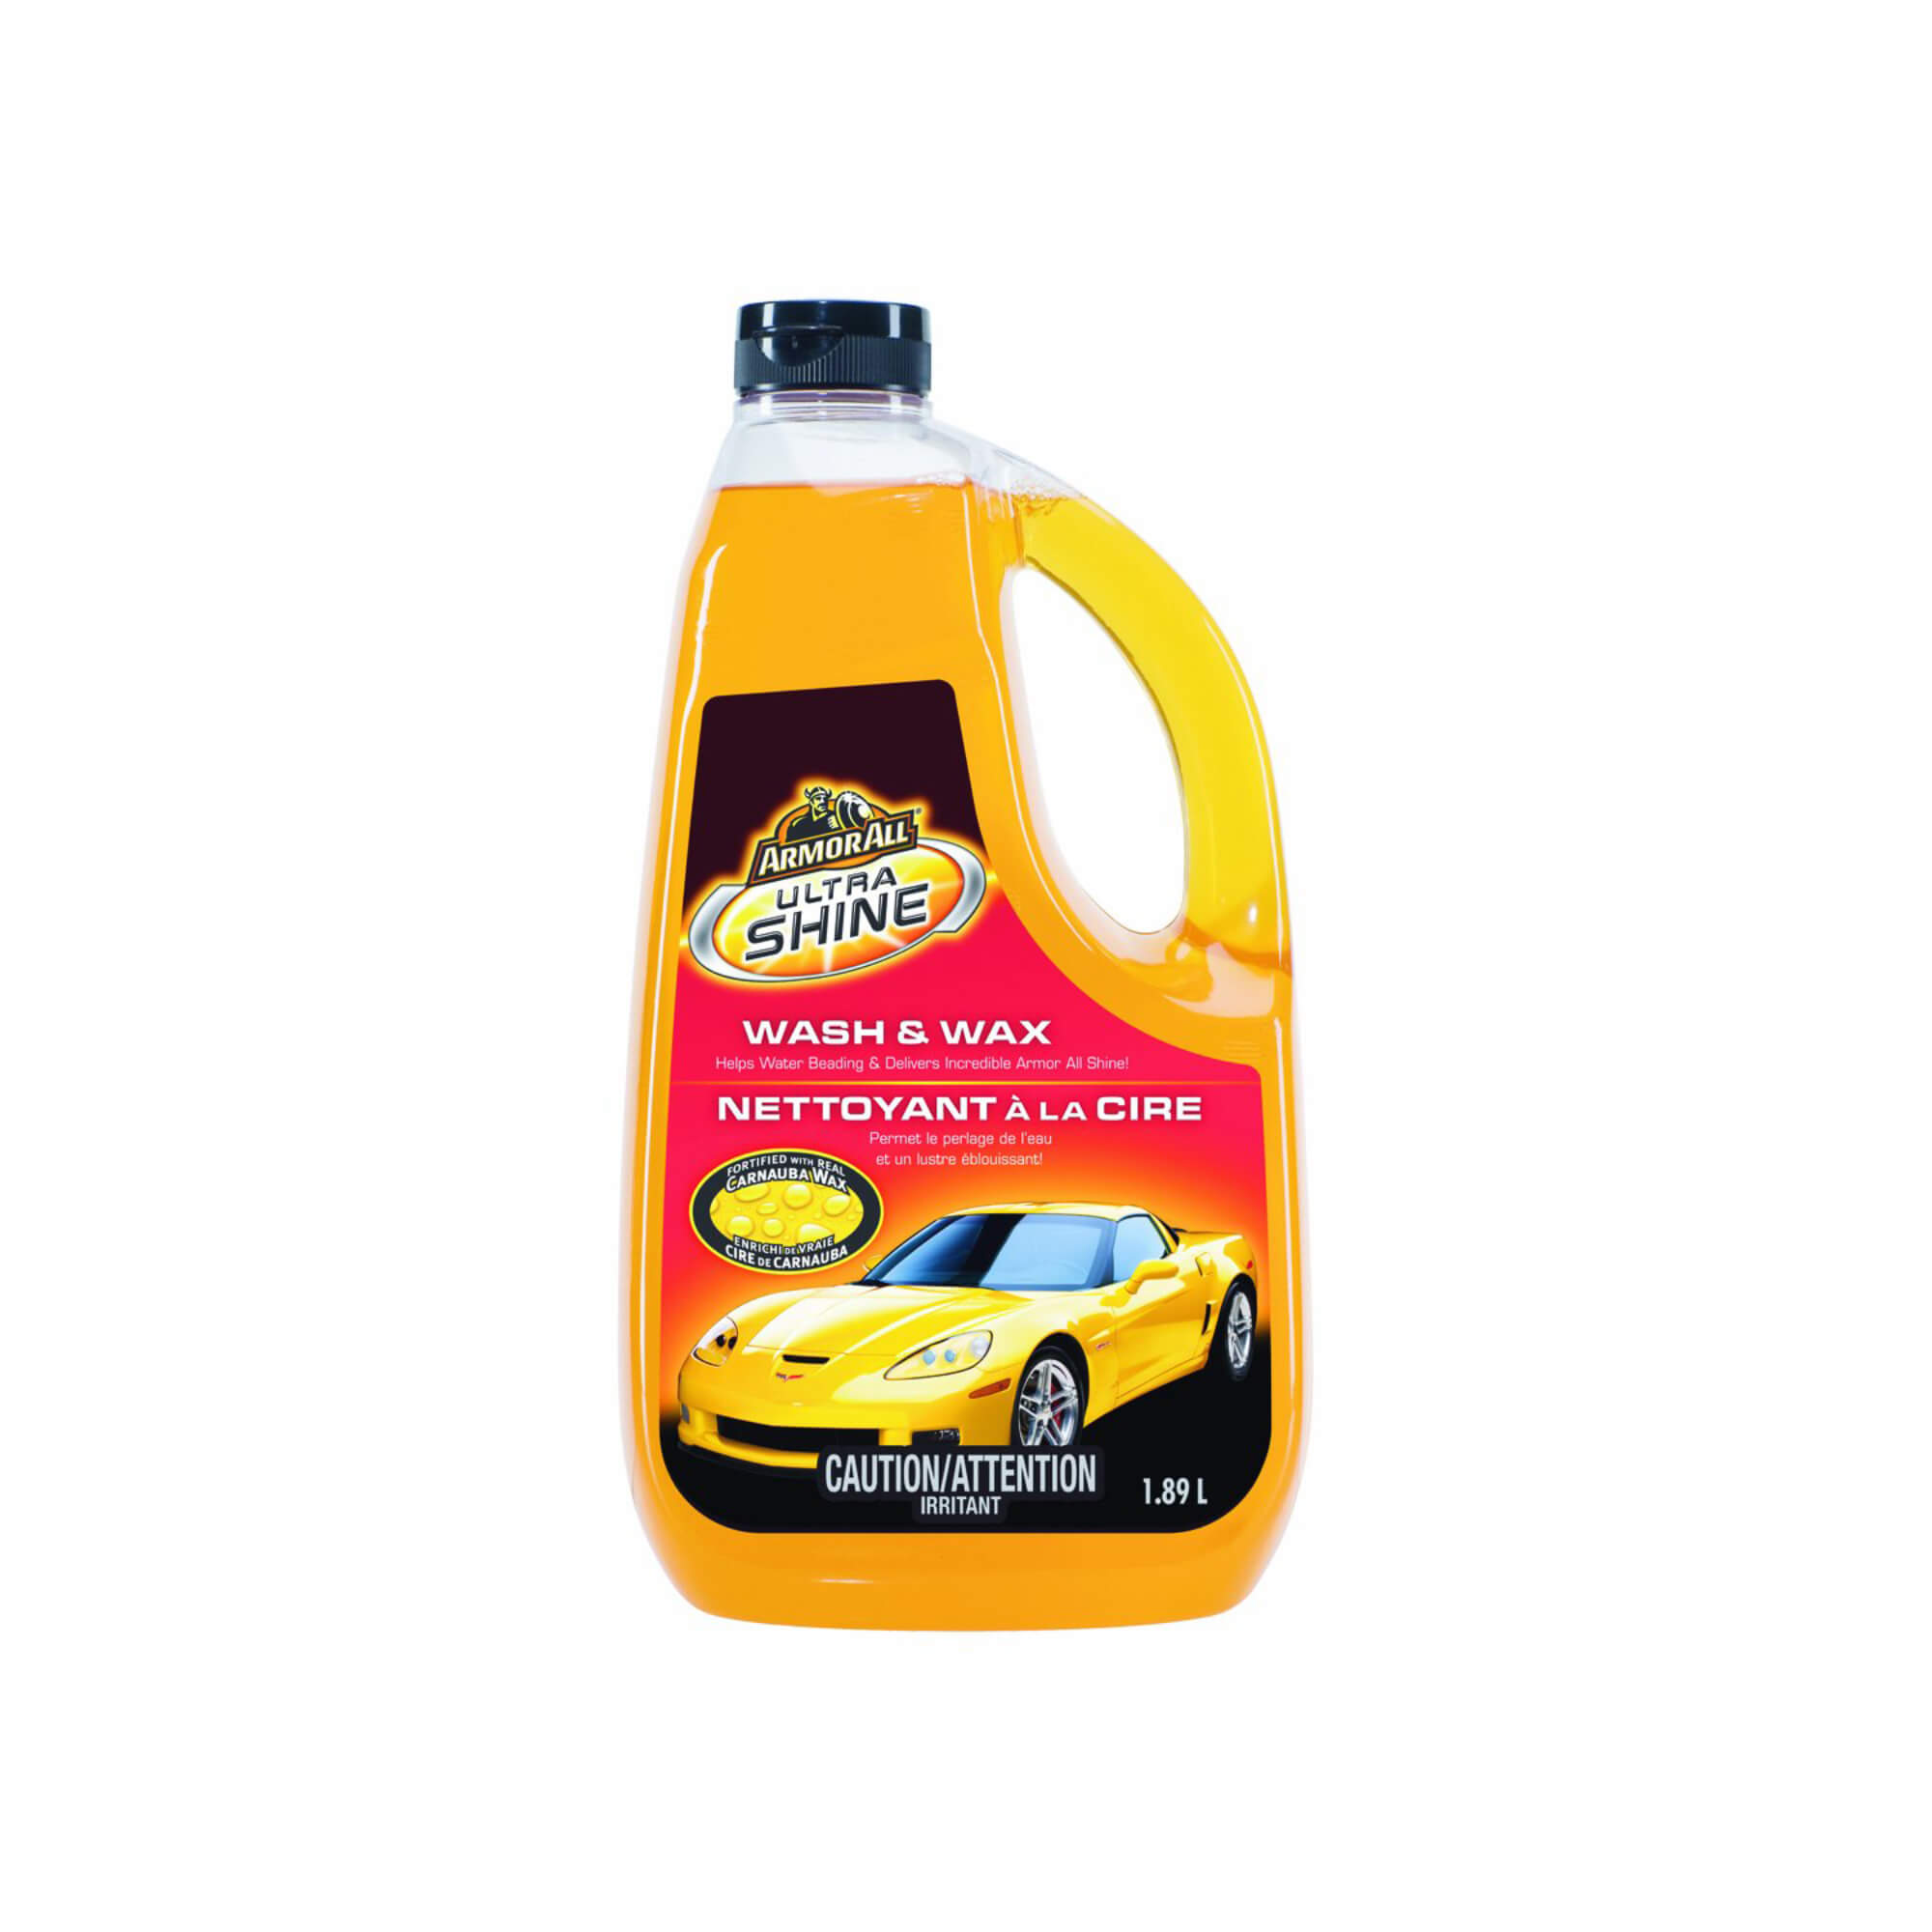 Armor All 11322G Ultra Shine Wash and Wax, 1.89L